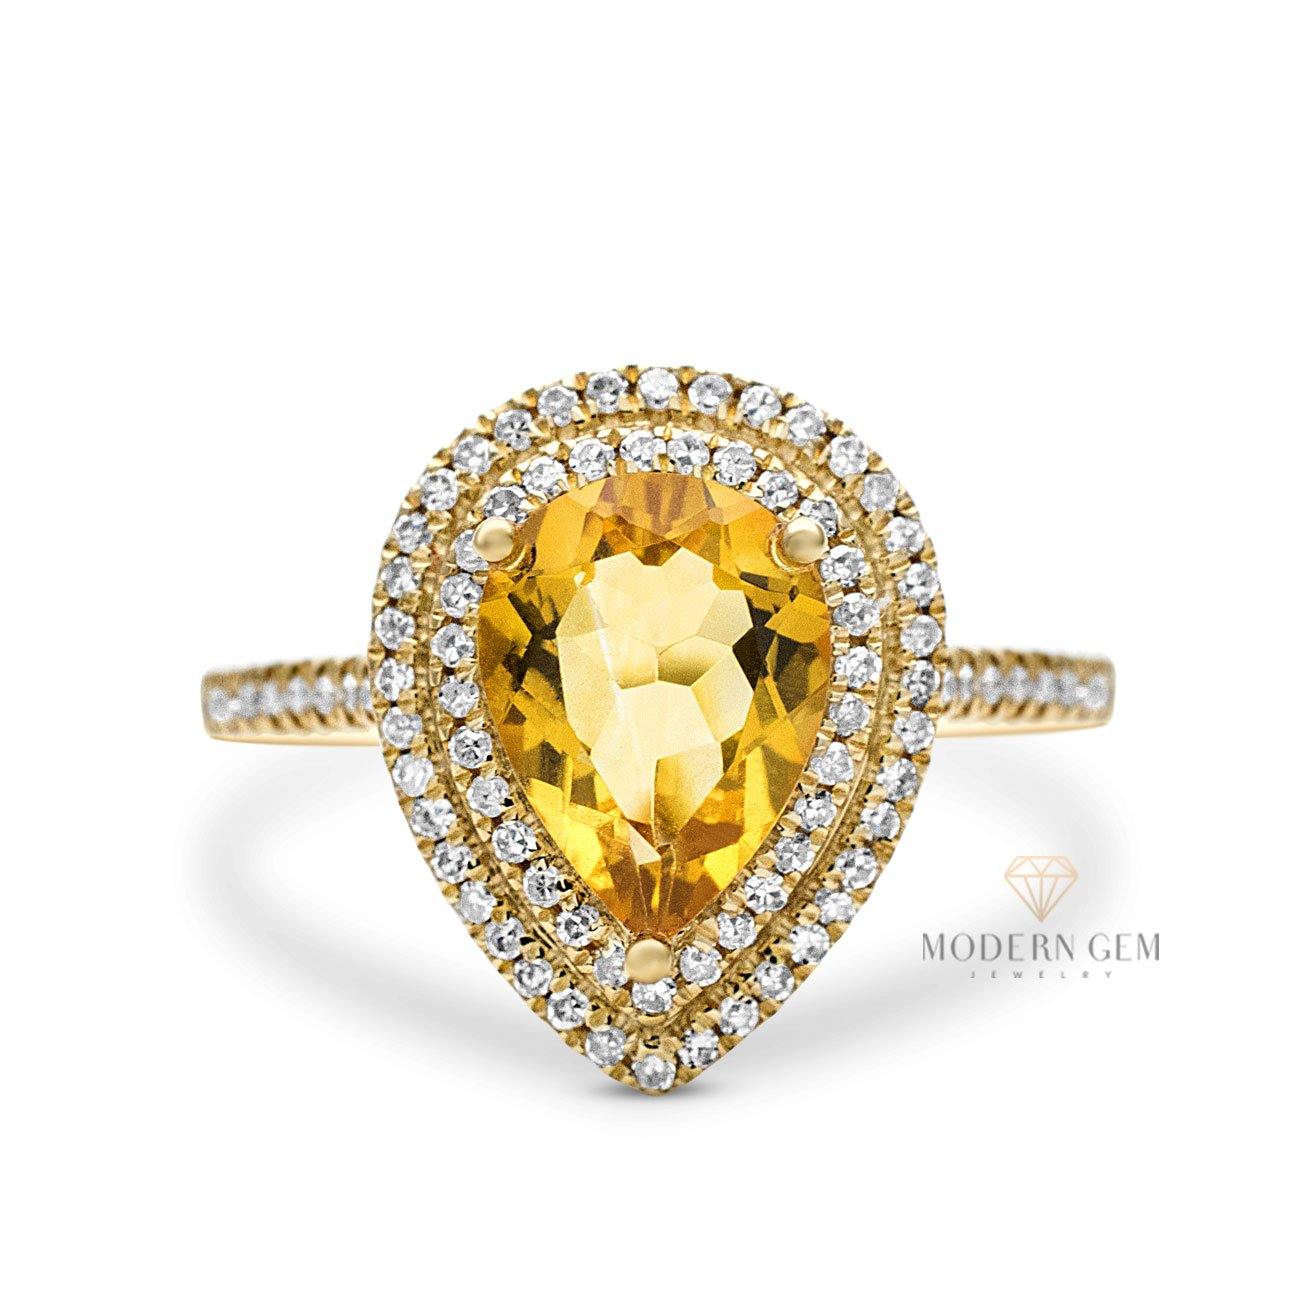 Citrine Ring in Pear Shape and Yellow Gold | Custom Engagement Ring | Modern Gem Jewelry | Saratti 